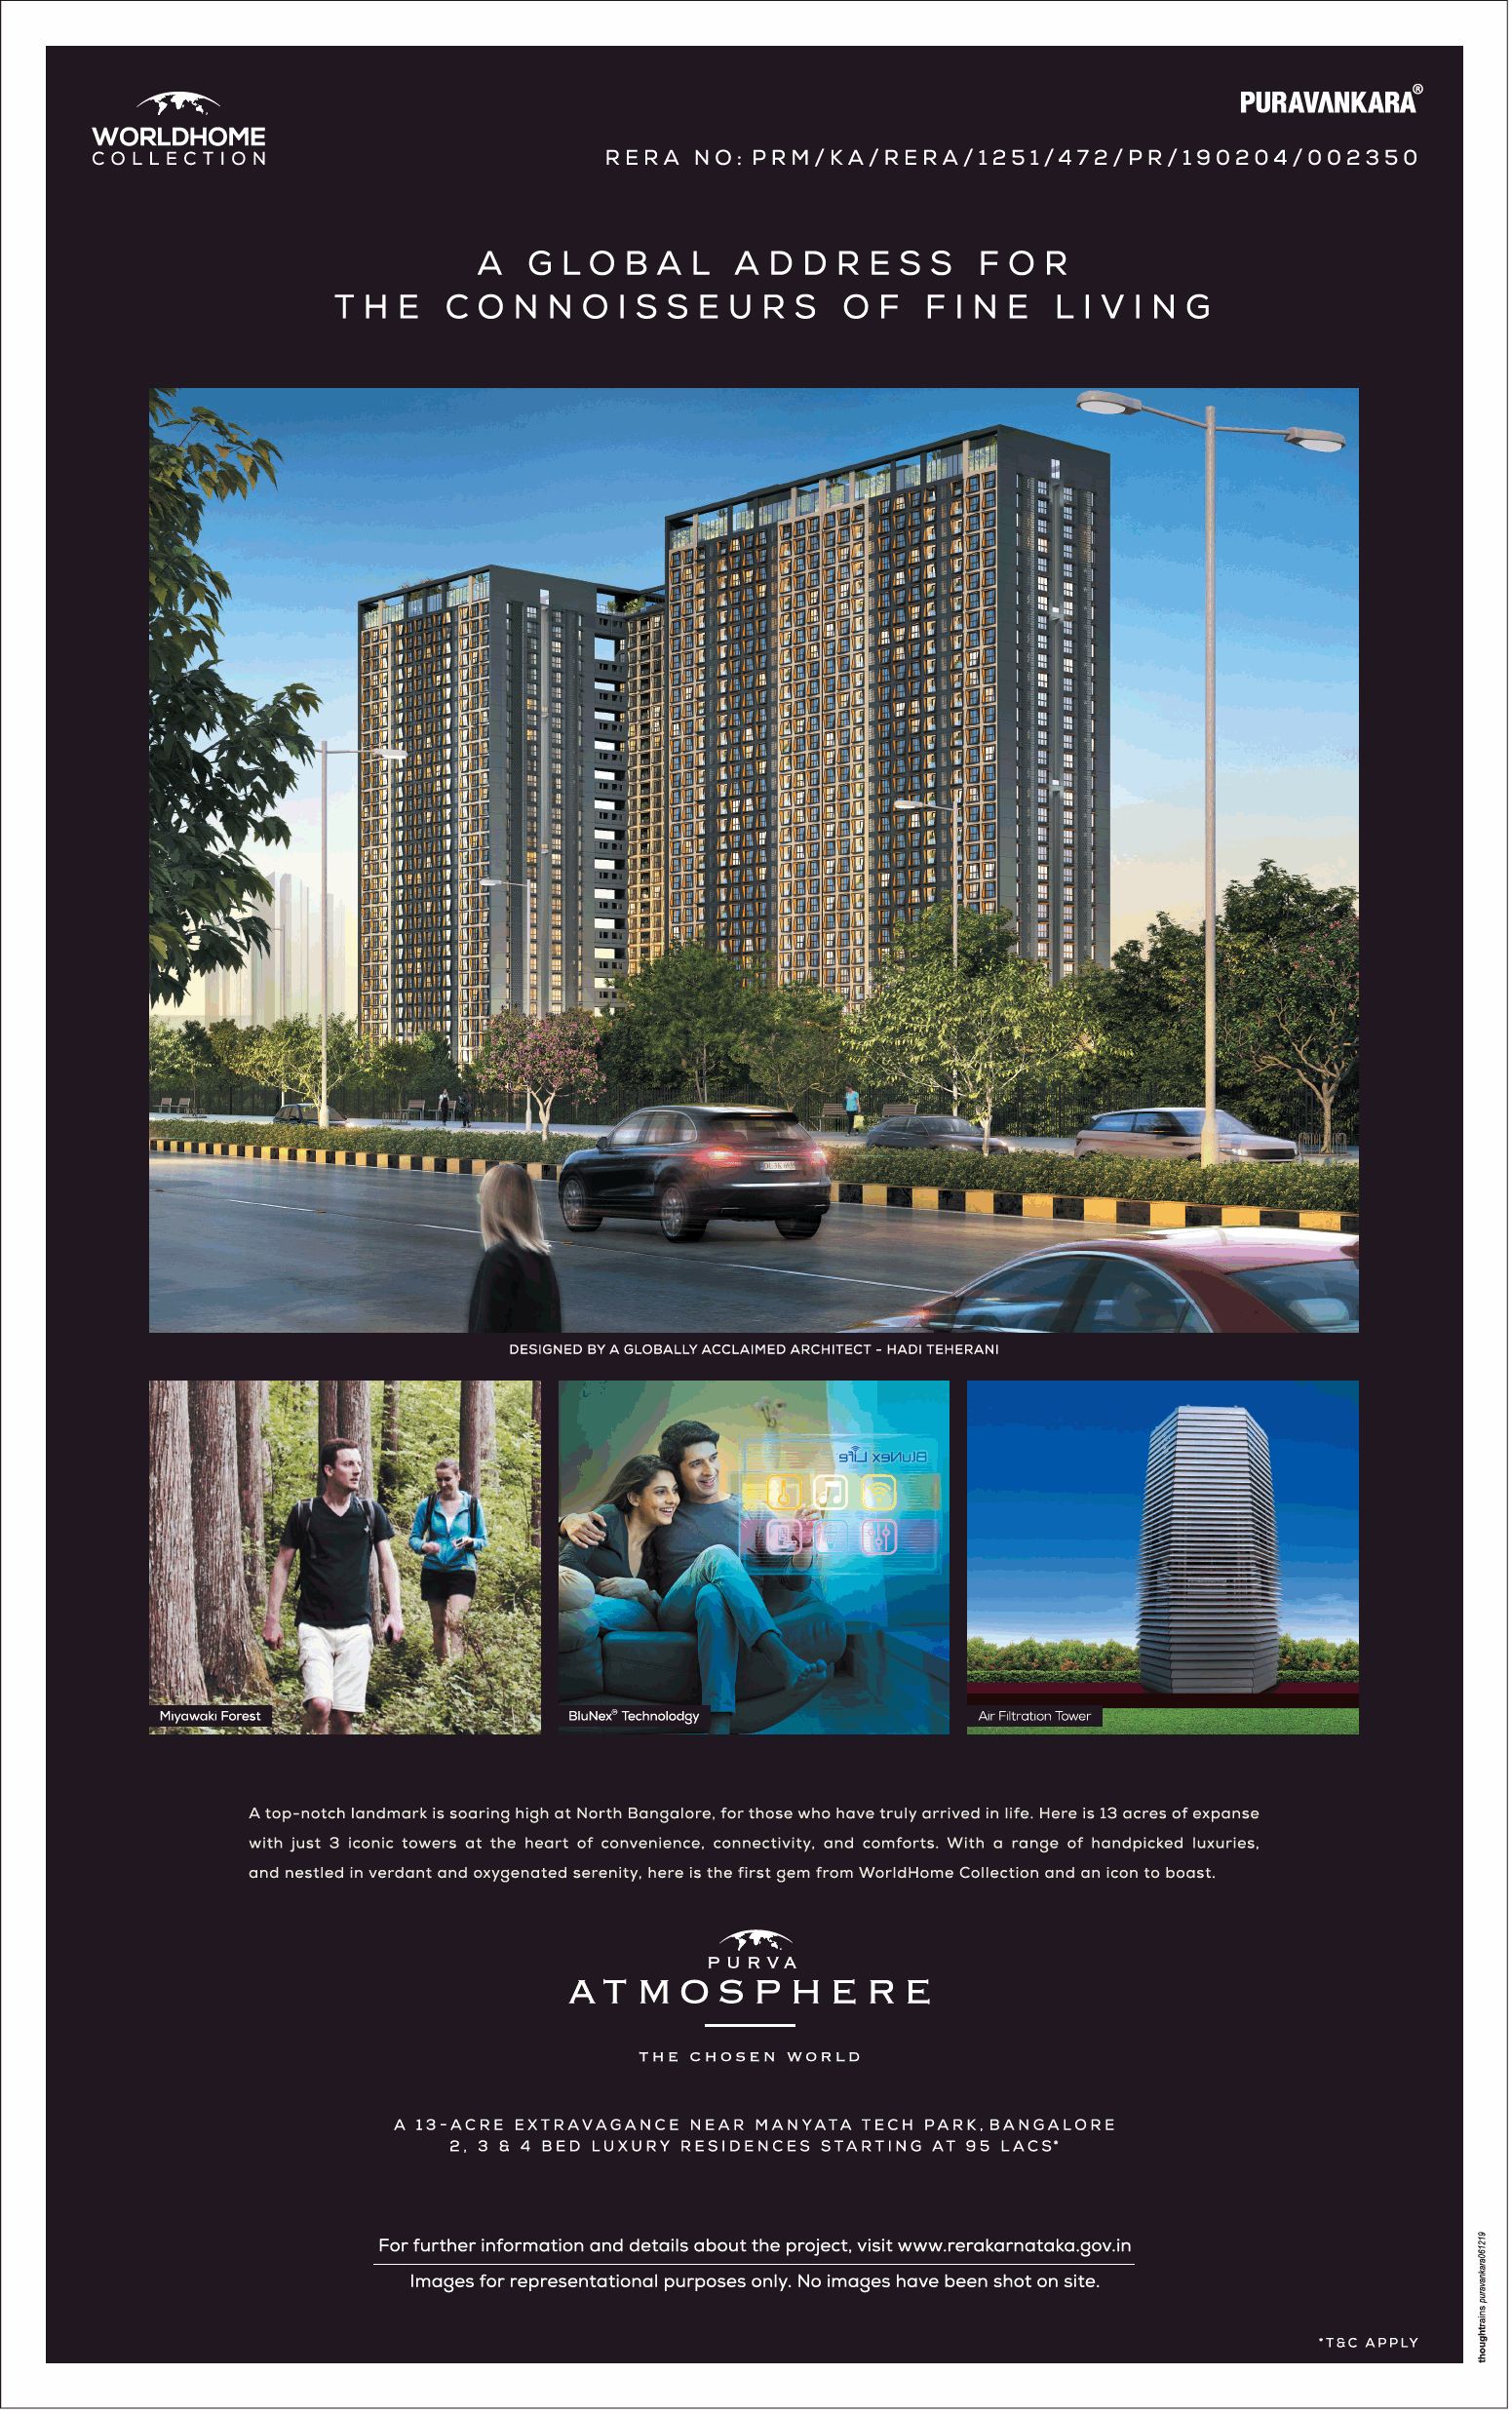 Book 2, 3 & 4 bed luxury residences starting Rs 95 Lacs at Purva Atmosphere, Bangalore Update